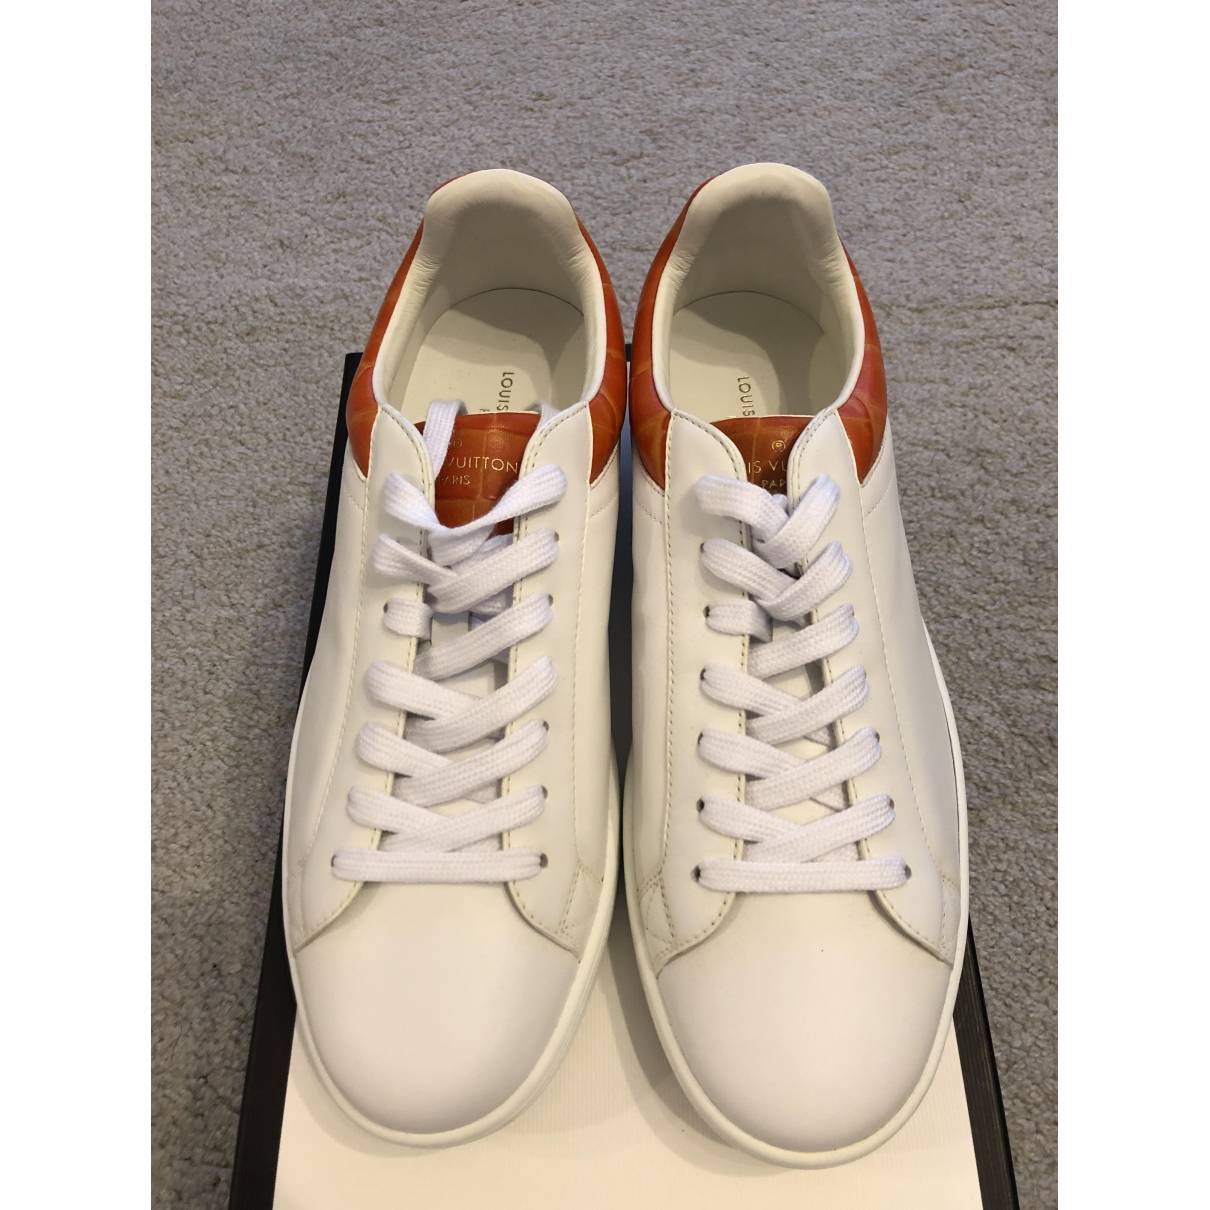 Louis Vuitton - Authenticated Luxembourg Trainer - Leather White Plain for Men, Good Condition